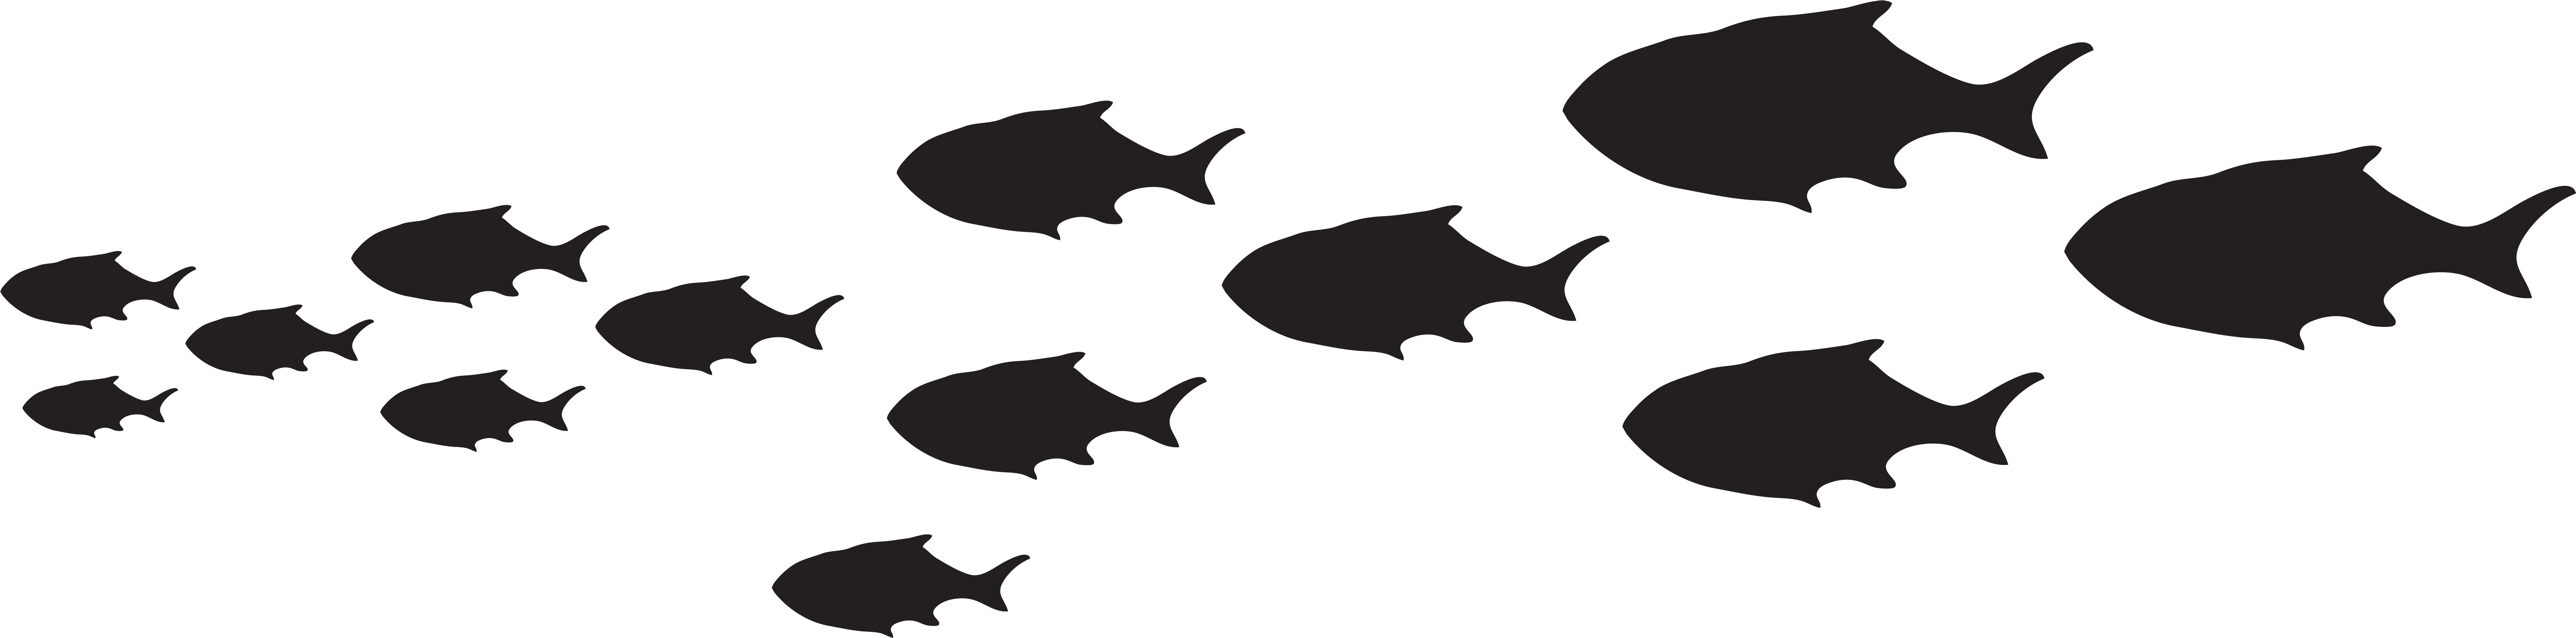 Fish Silhouette Clip Art At Getdrawings - School Of Fish Silhouette Png (8000x2098), Png Download